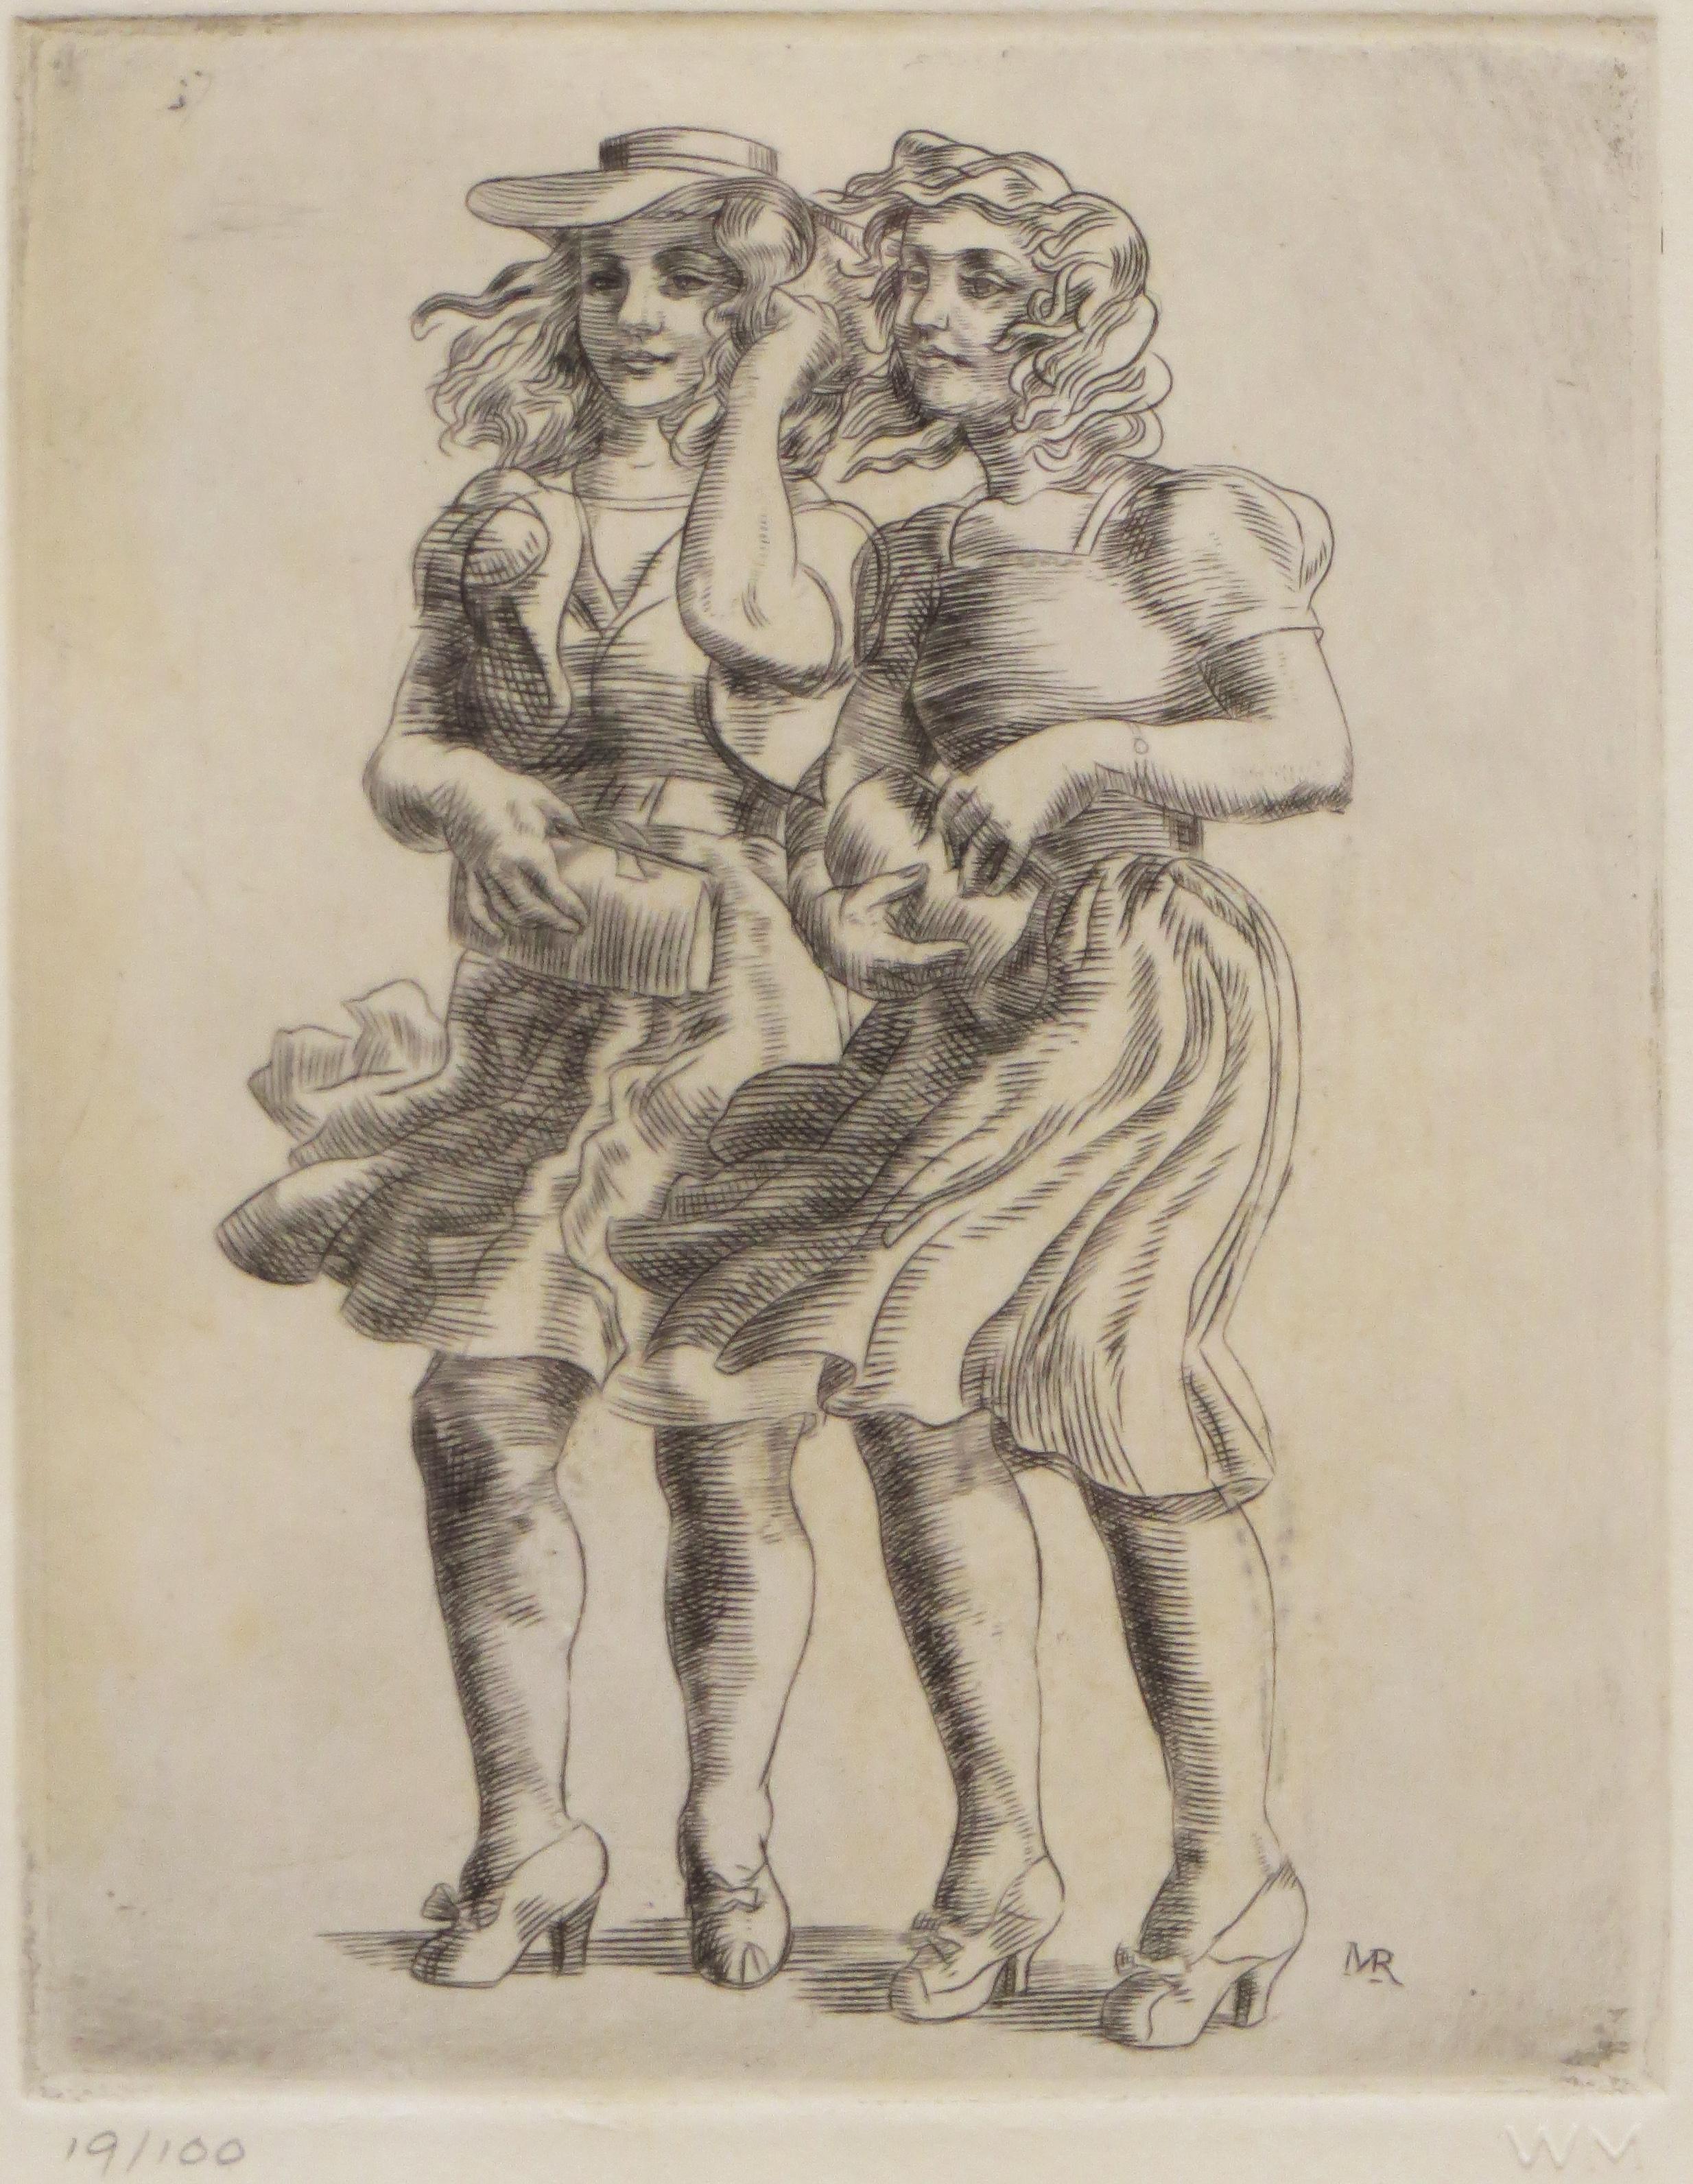 Two Girls in the Wind - Realist Print by Reginald Marsh